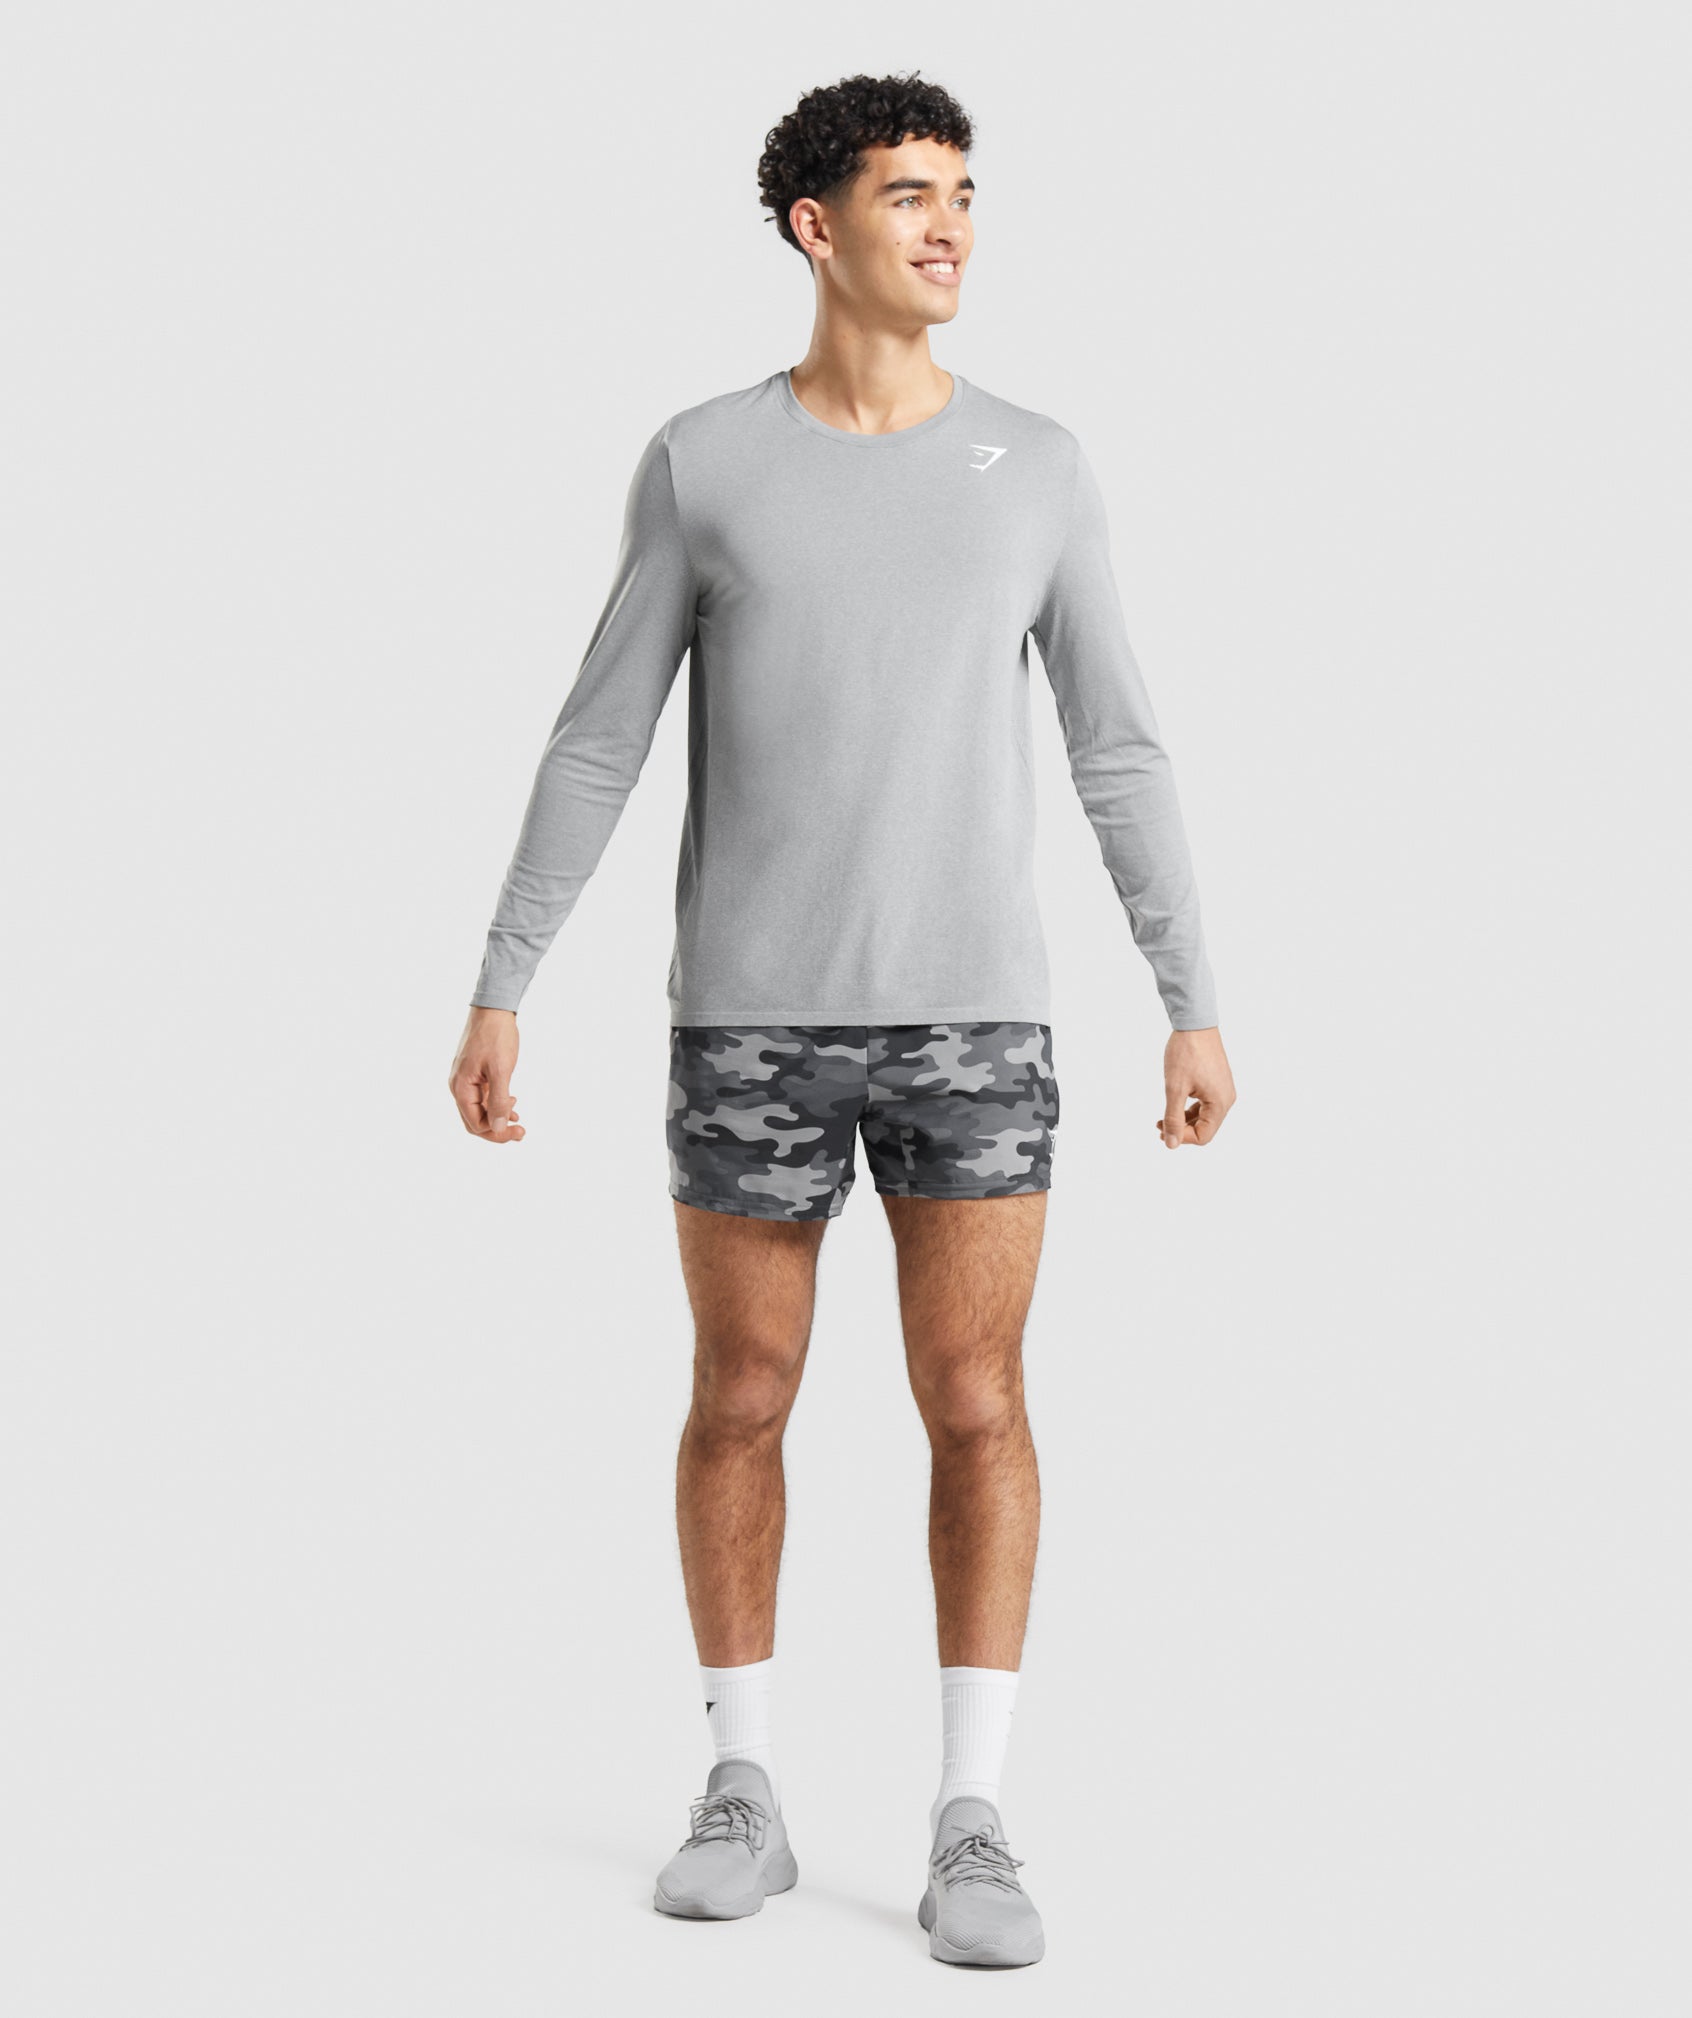 Arrival Seamless Long Sleeve T-Shirt in Grey - view 4